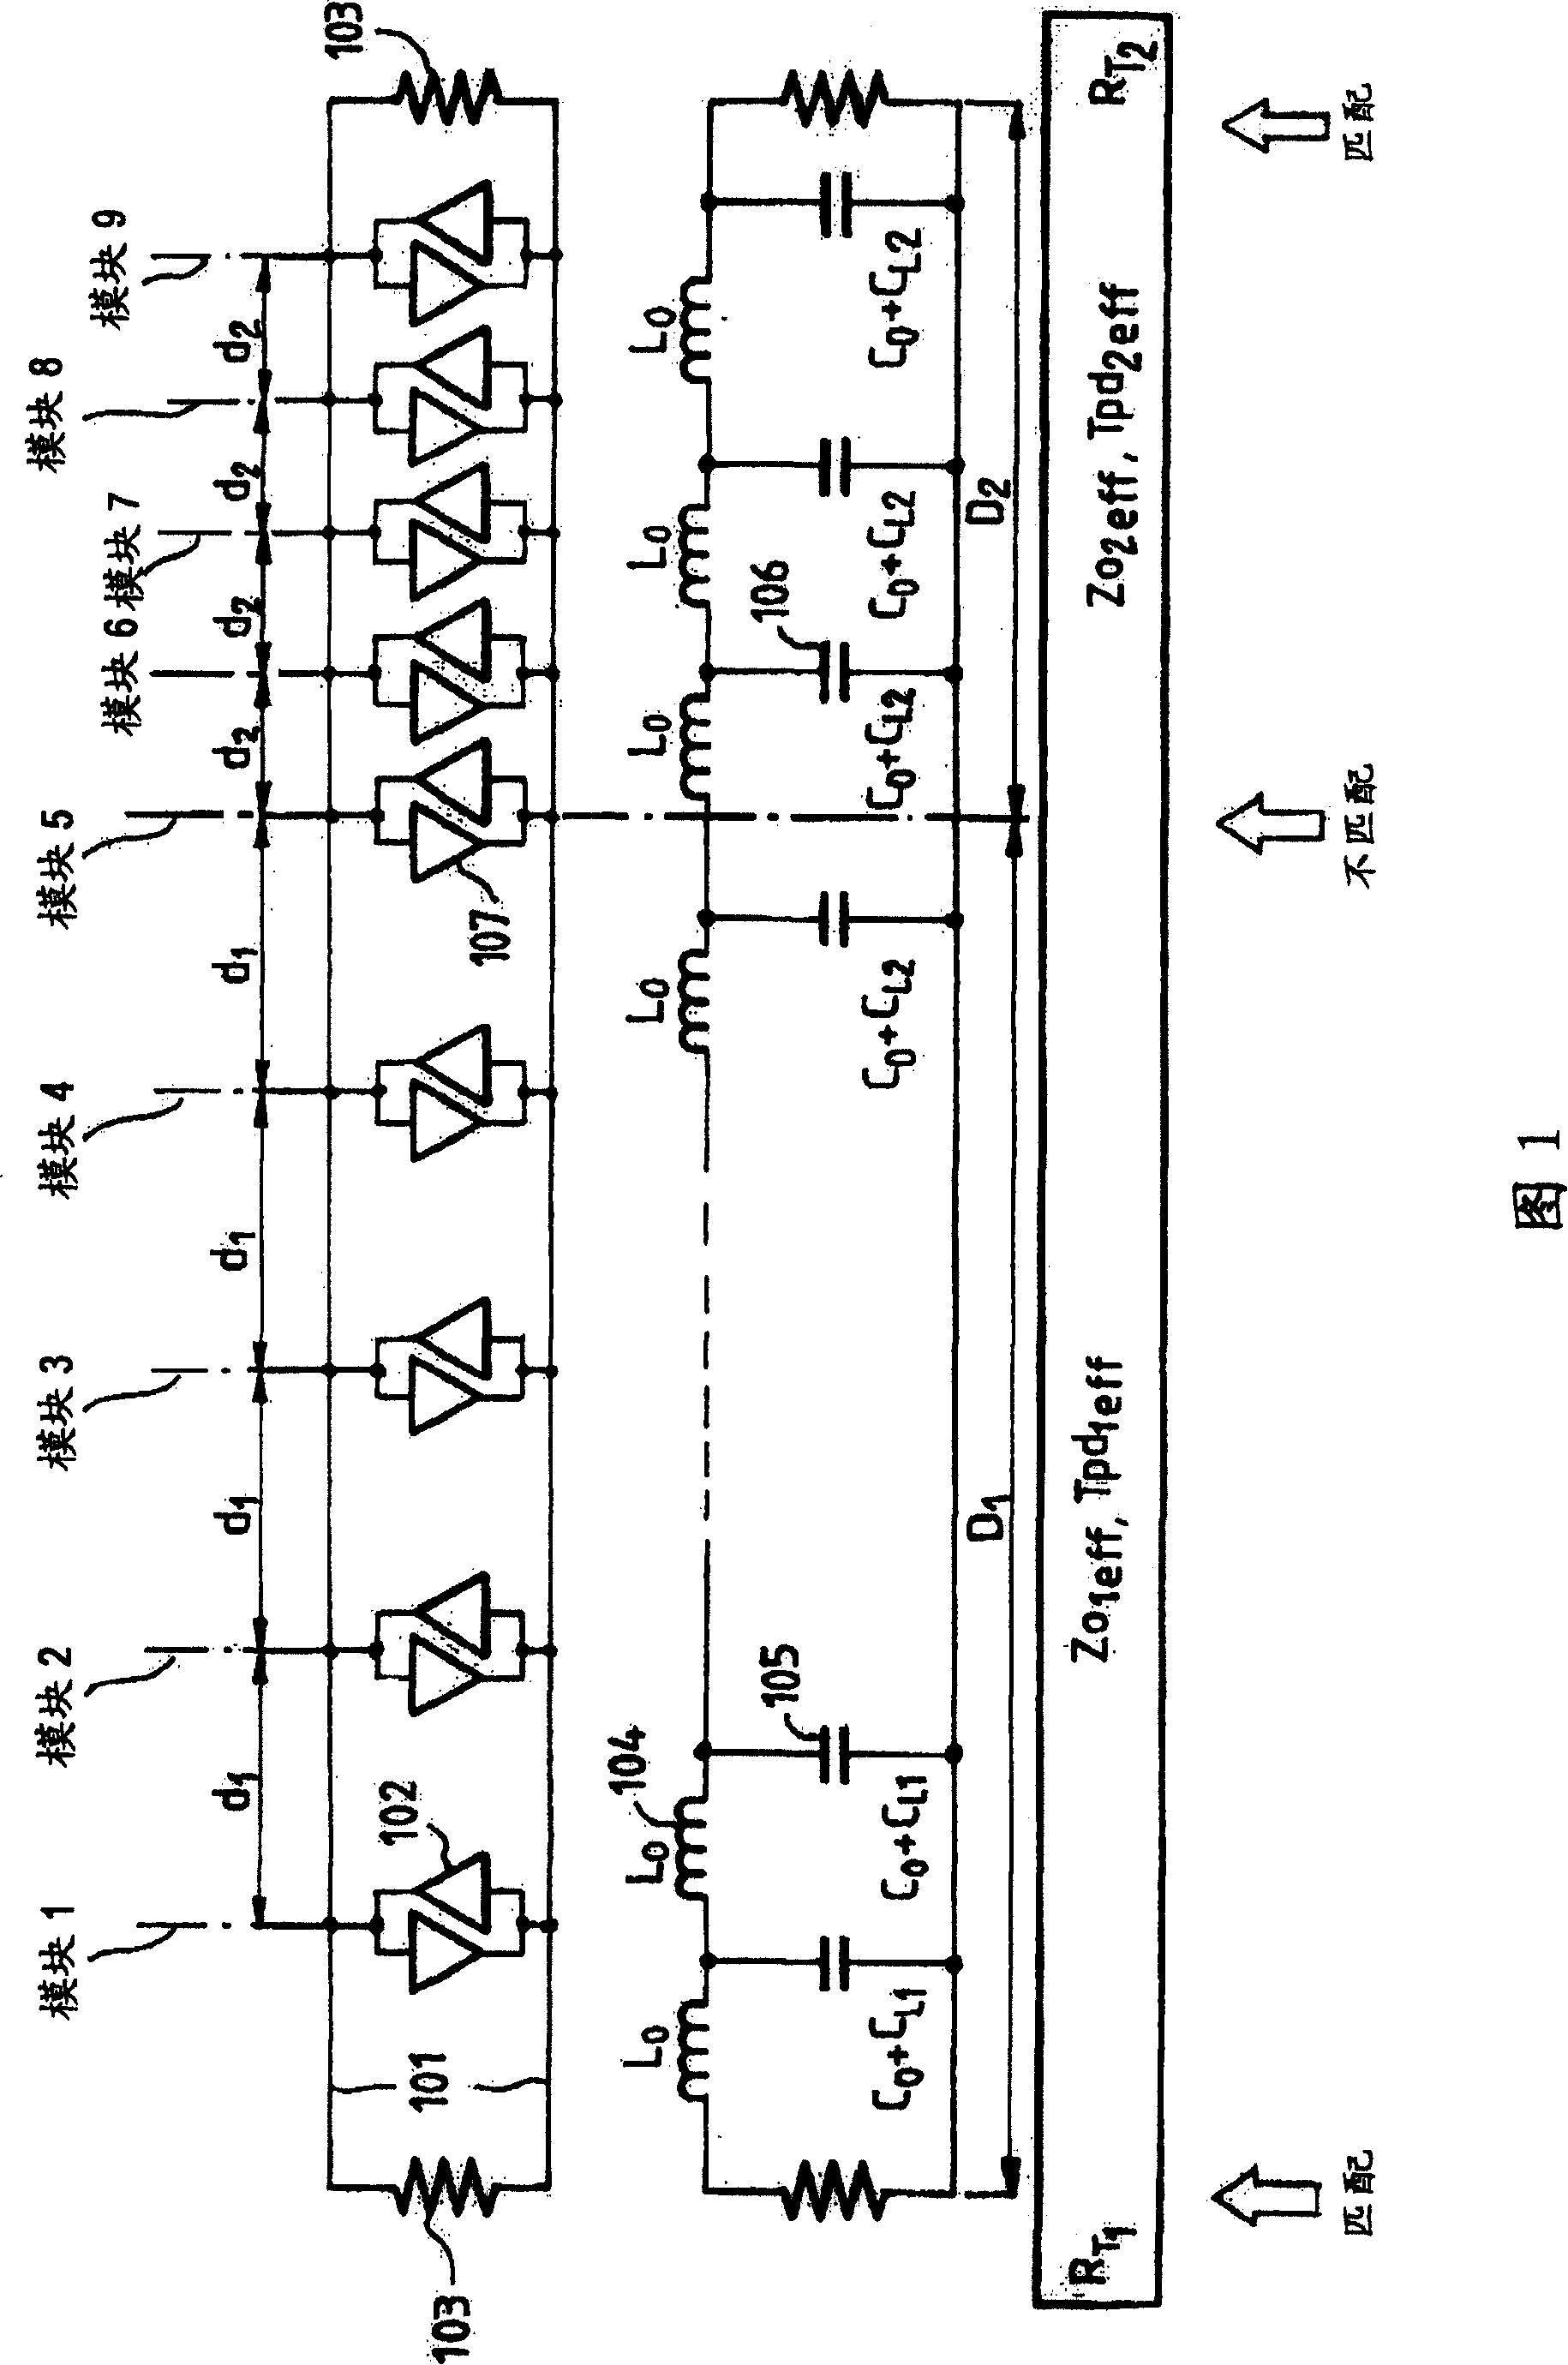 Bus type connection system for backplanes